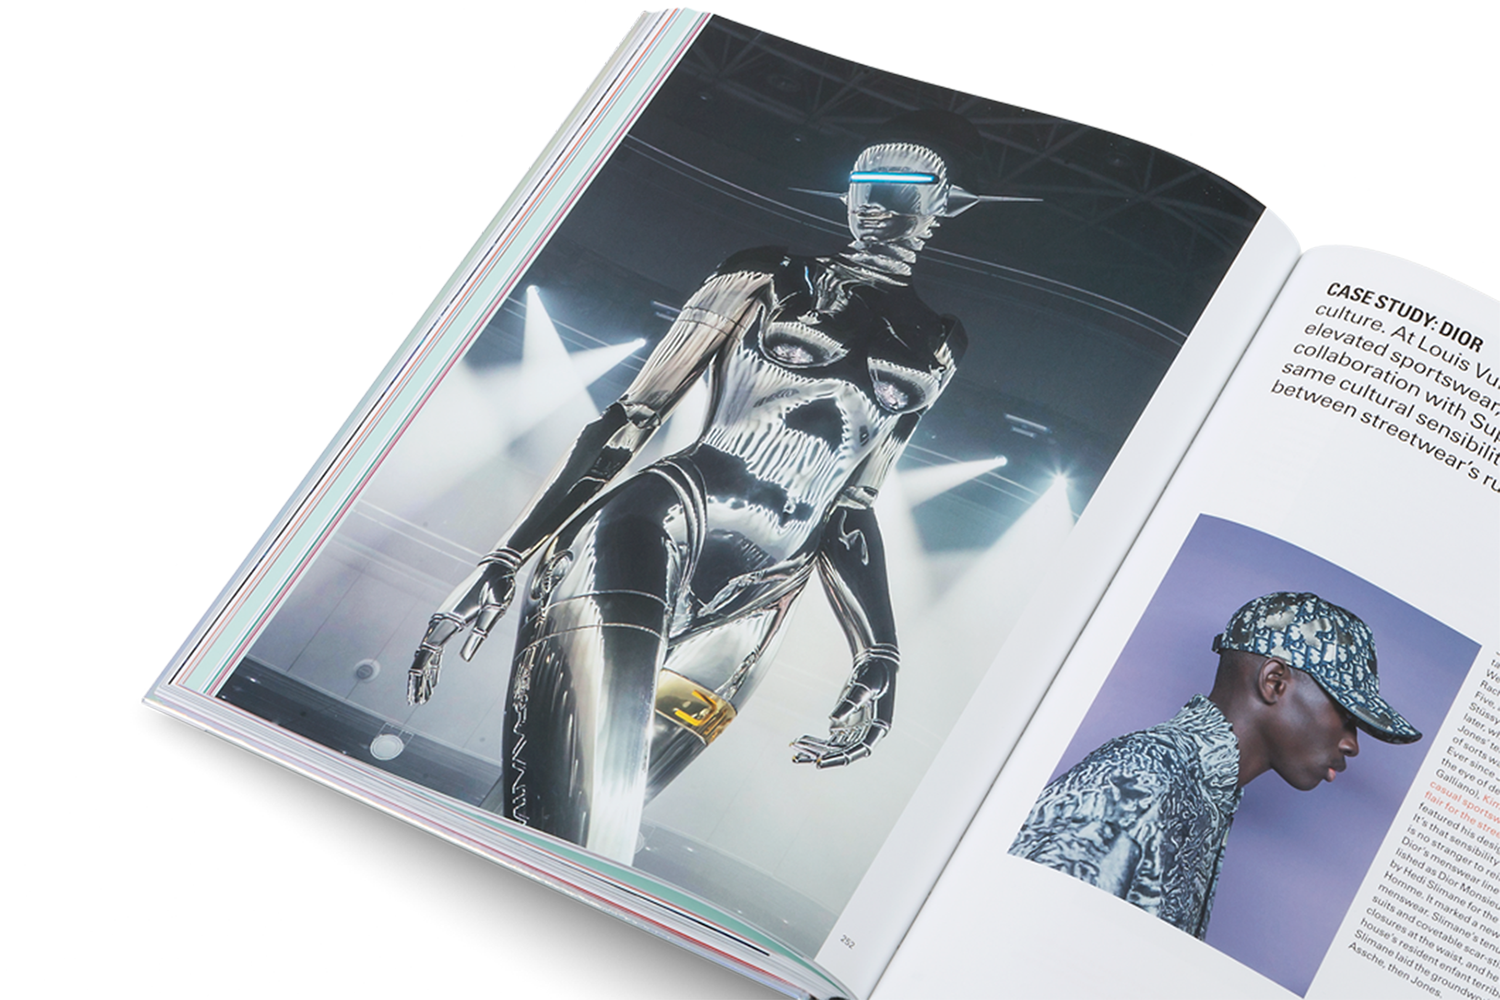 THE NEW LUXURY- HIGH SNOBIETY BOOK